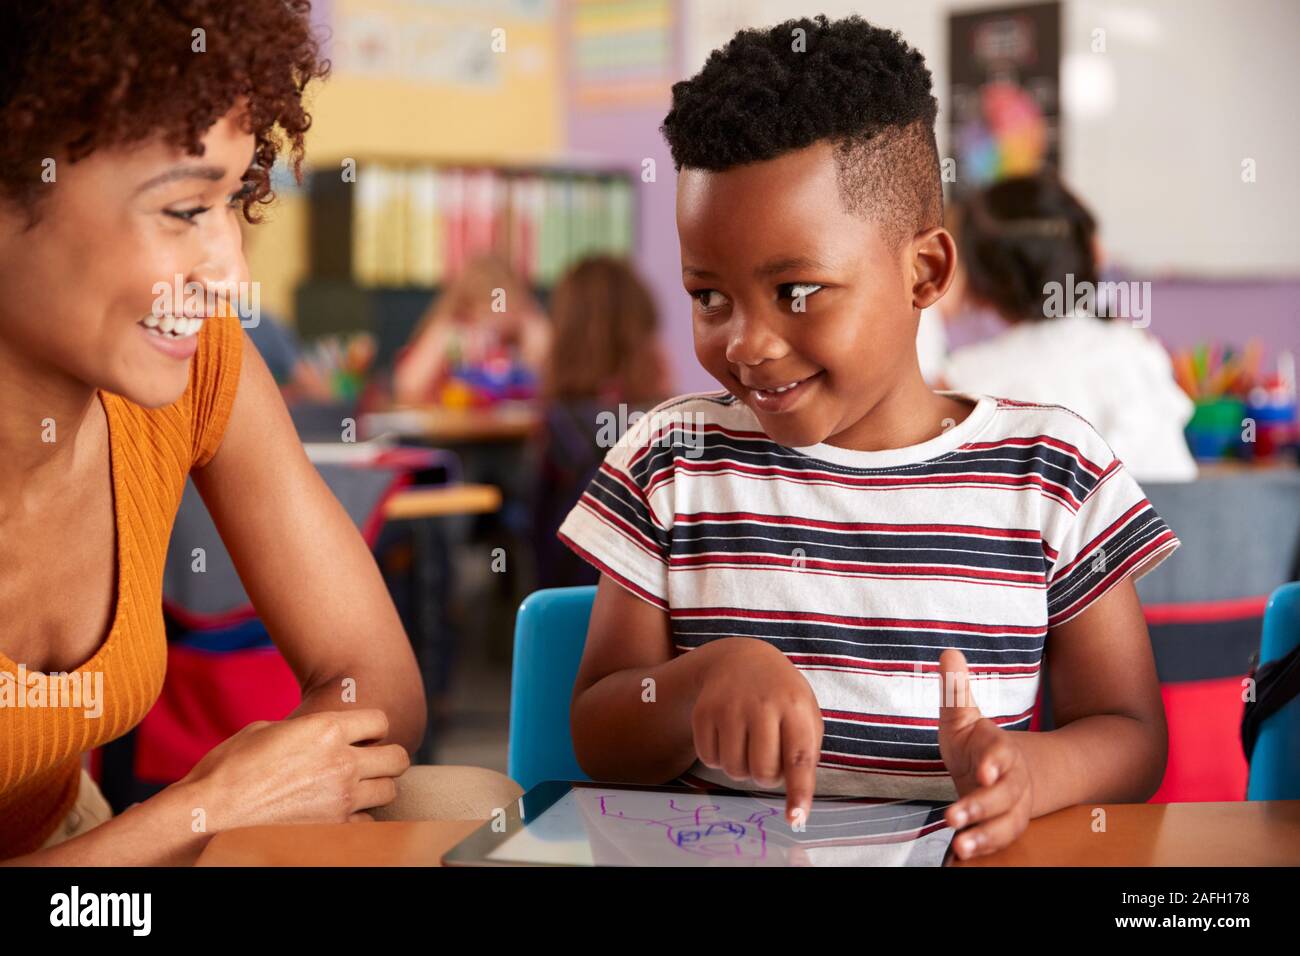 Elementary School Teacher And Male Pupil Drawing Using Digital Tablet In Classroom Stock Photo